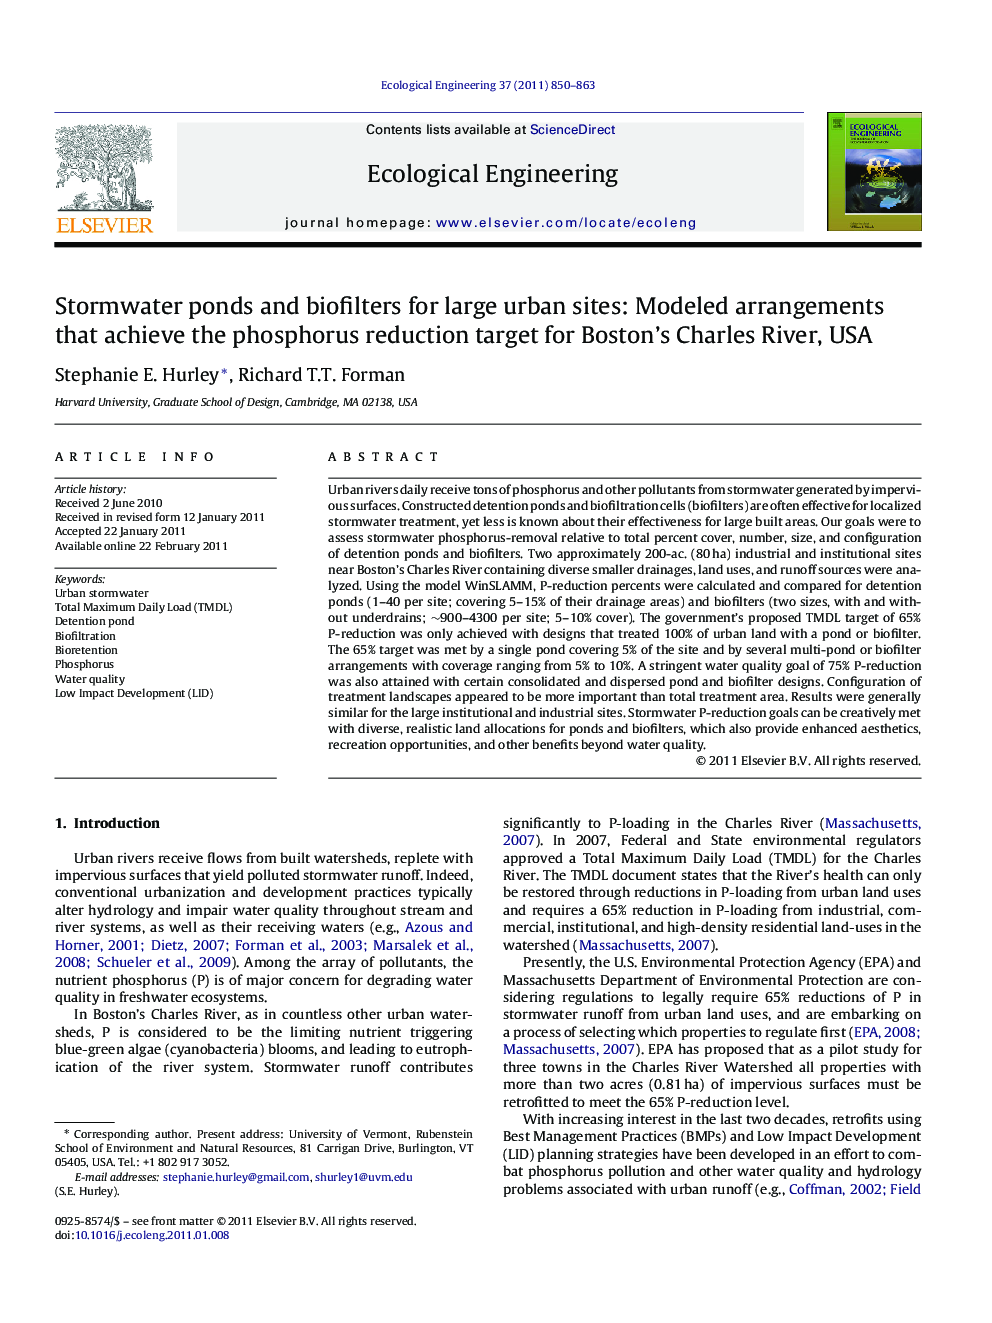 Stormwater ponds and biofilters for large urban sites: Modeled arrangements that achieve the phosphorus reduction target for Boston's Charles River, USA